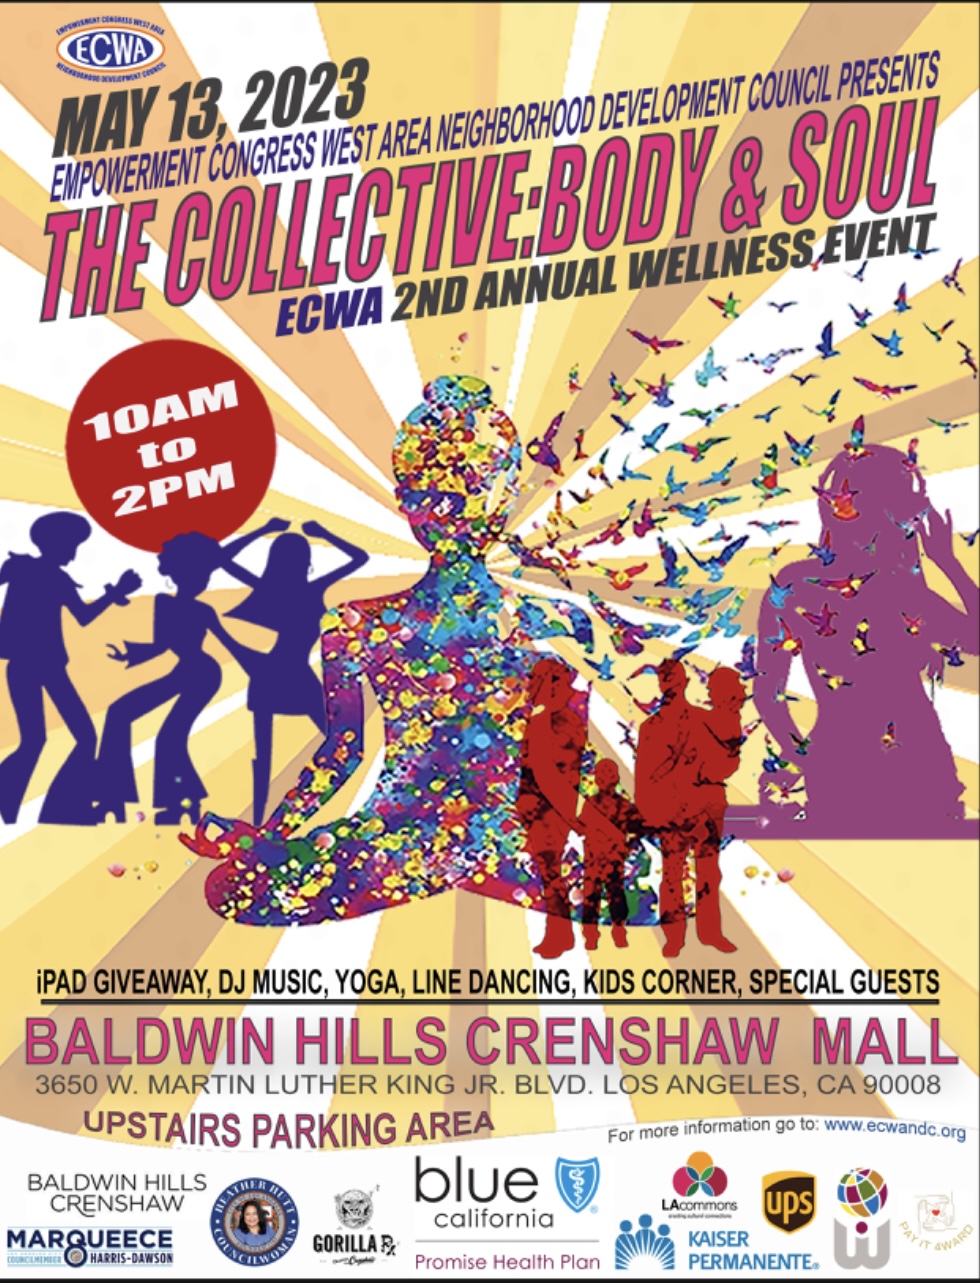 The Collective: Body & Soul